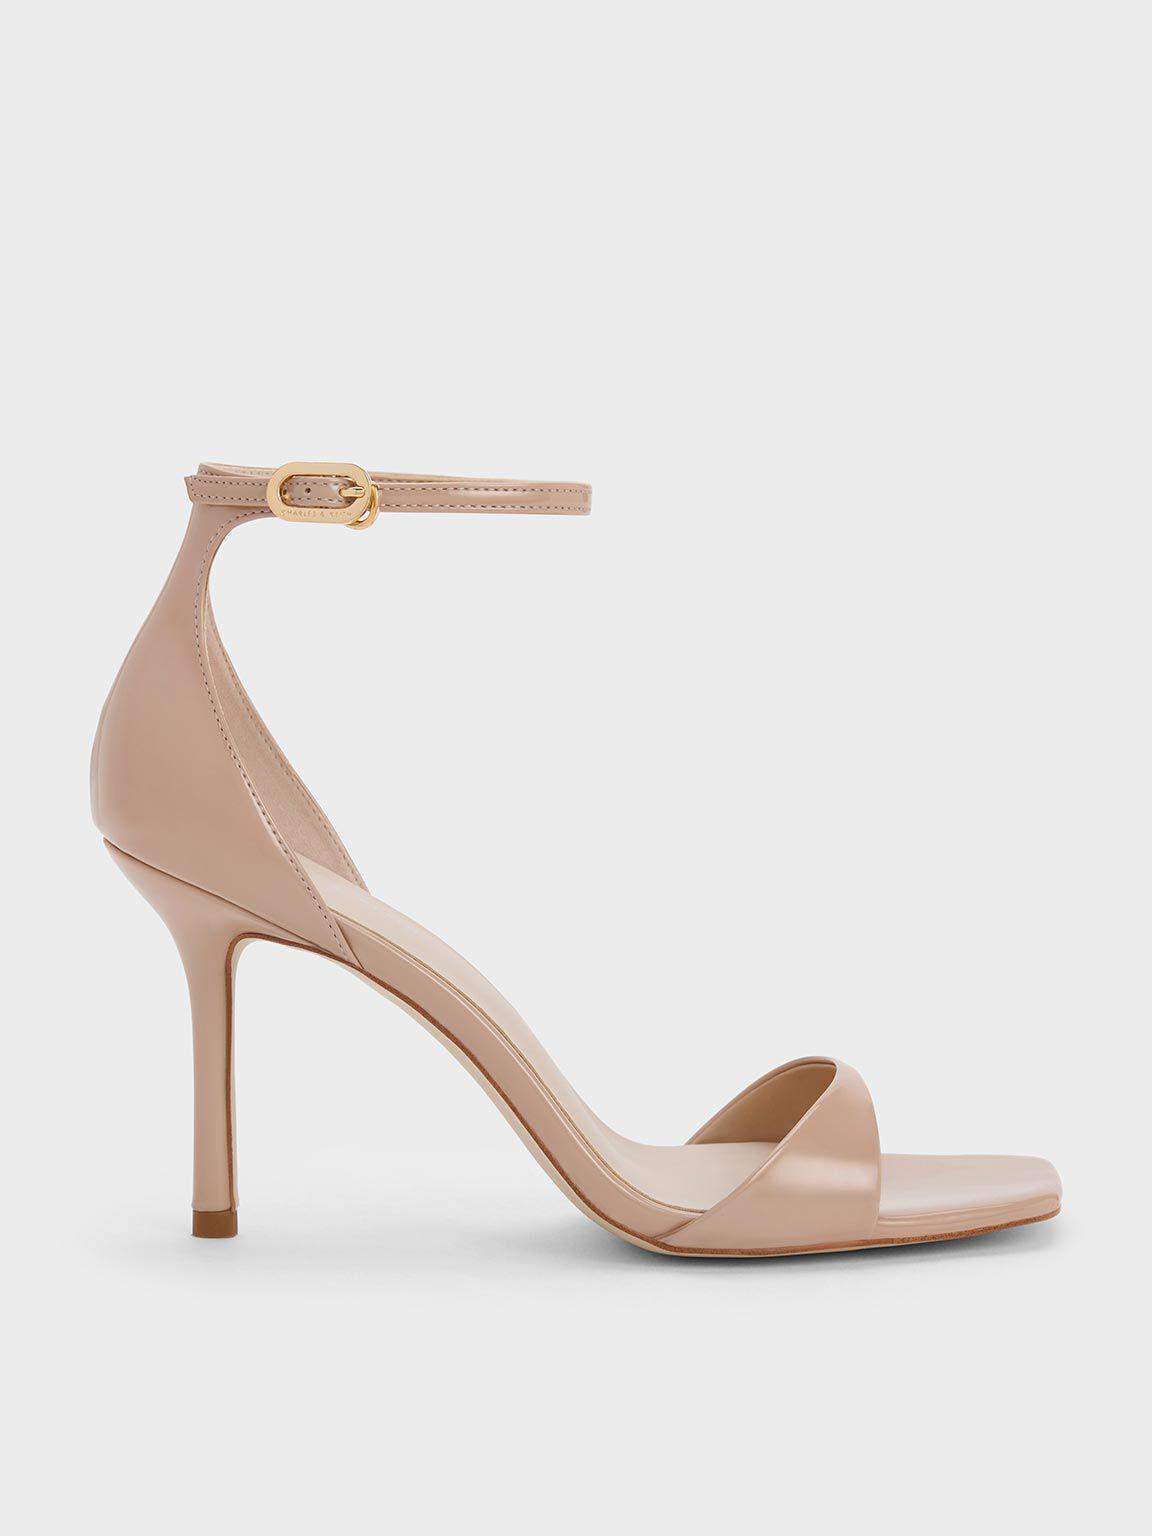 1152px x 1536px - Nude Patent Ankle Strap Heeled Sandals - CHARLES & KEITH SG